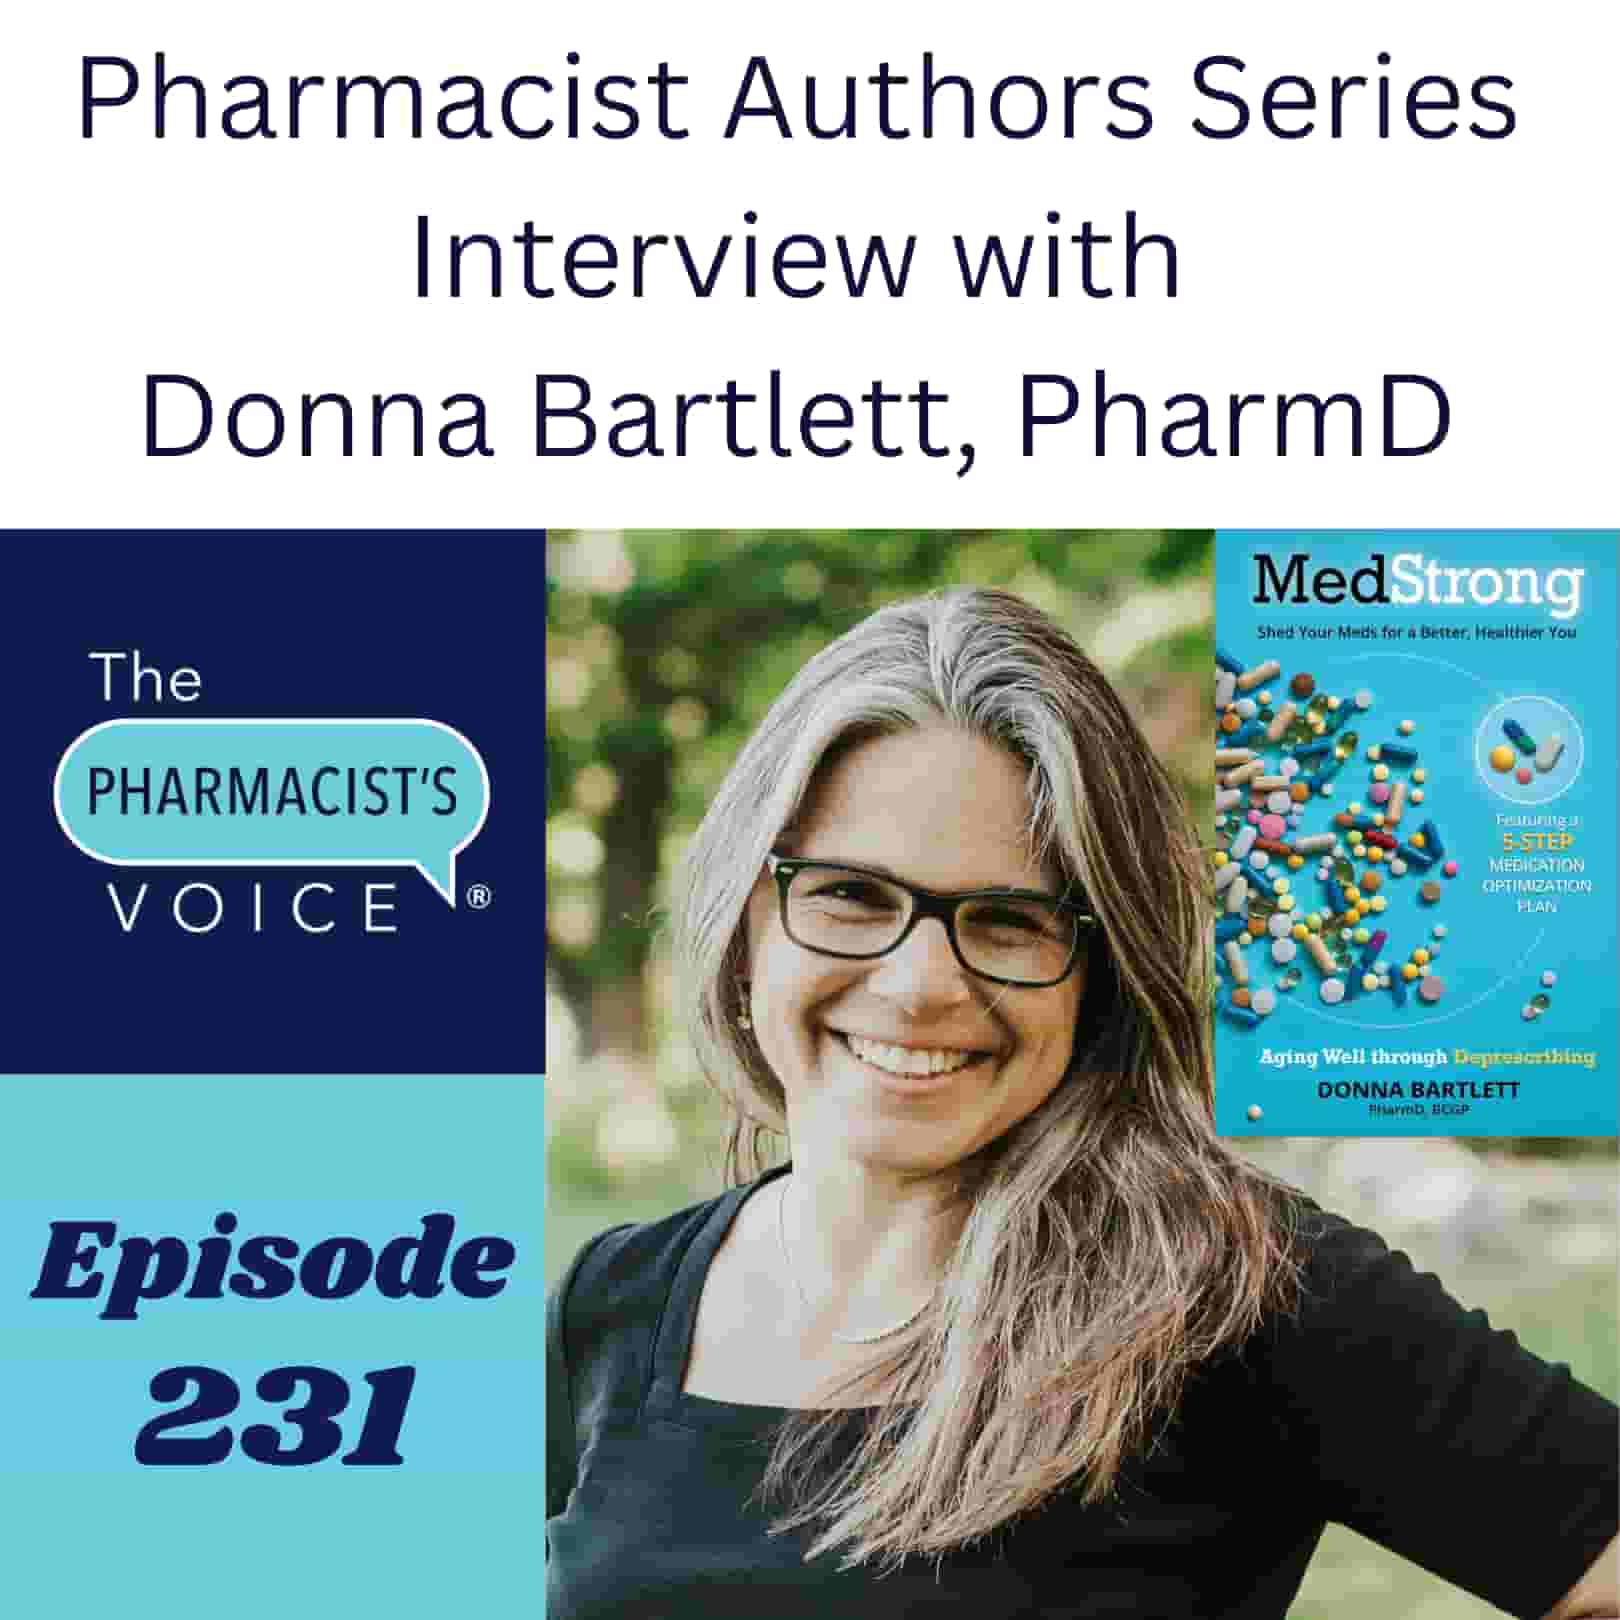 Pharmacist Authors Series Interview with Donna Bartlett, PharmD. The Pharmacist's Voice Podcast Episode 231. Donna has long salt and pepper gray hair and wears dark glasses. She has fair skin and wears a black t-shirt. She is smiling and looking at the camera.